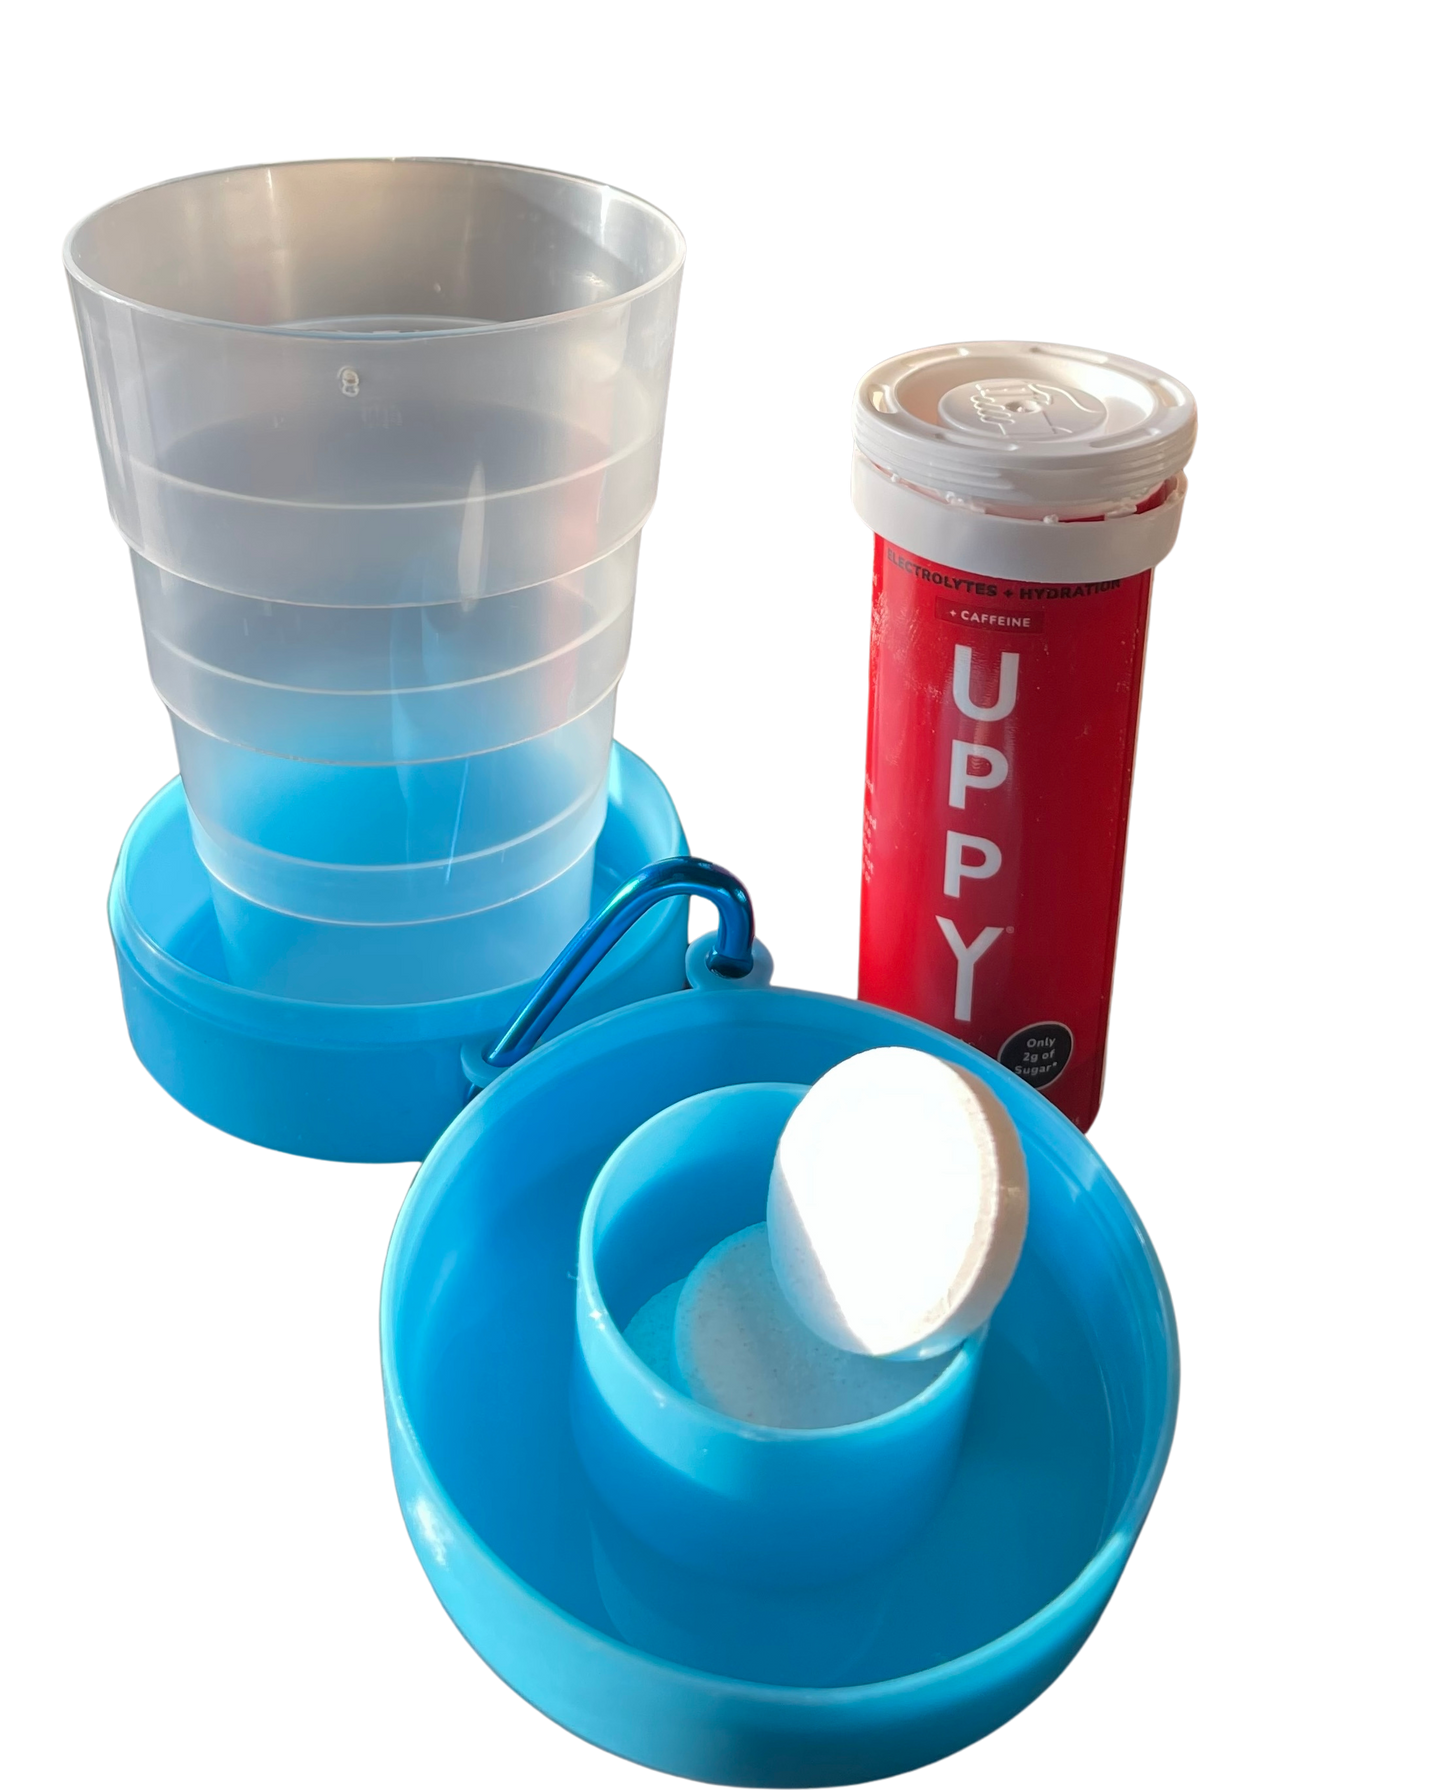 Uppy! On-The-Go Cup with Effervescent Tablet Holder